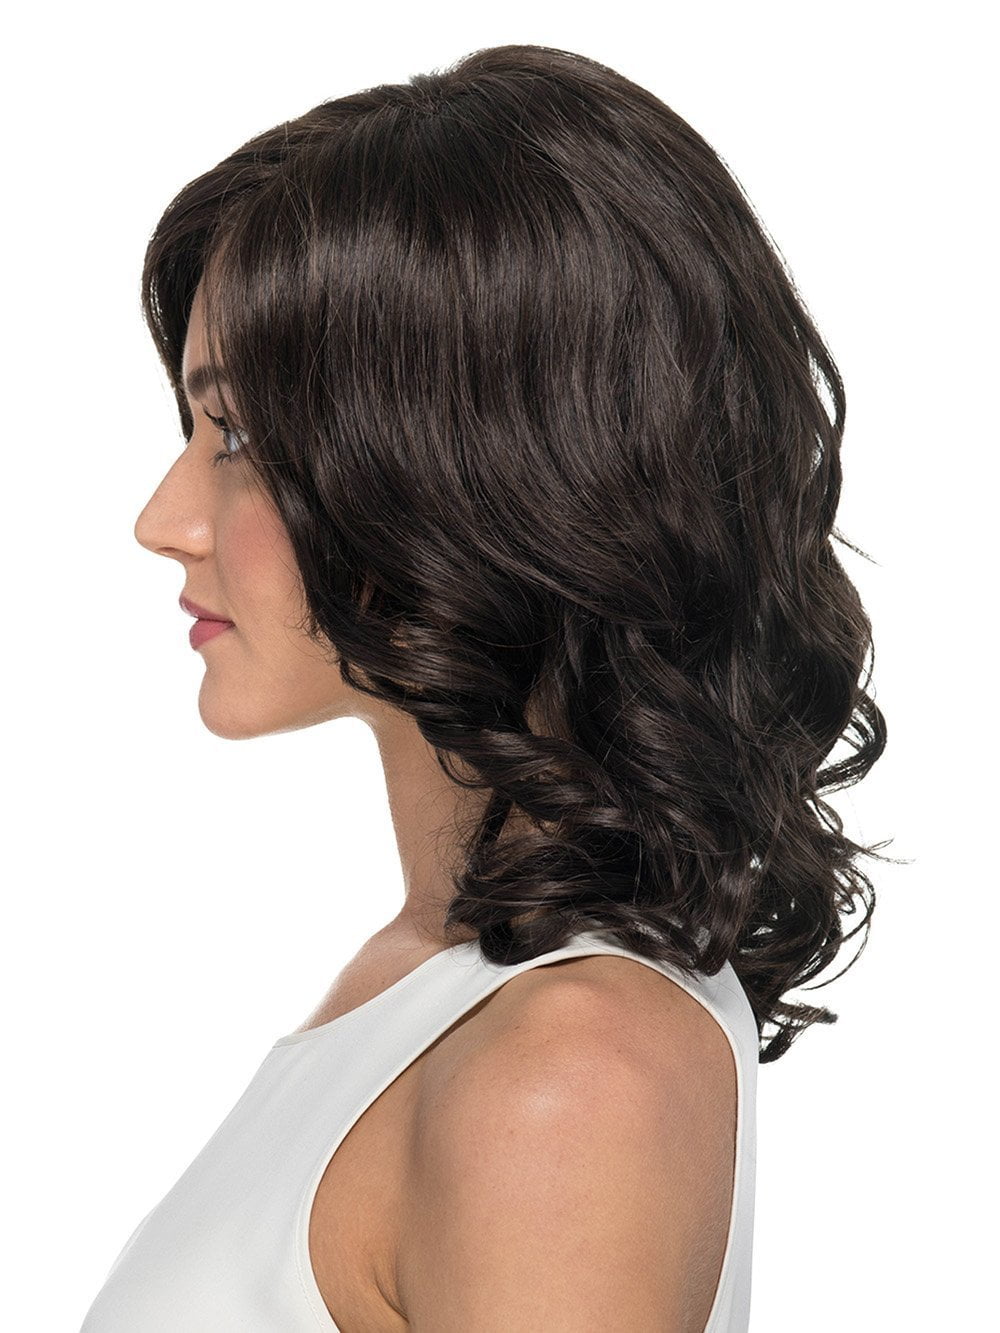 Shoulder Length Layered Cut with Loose Waves